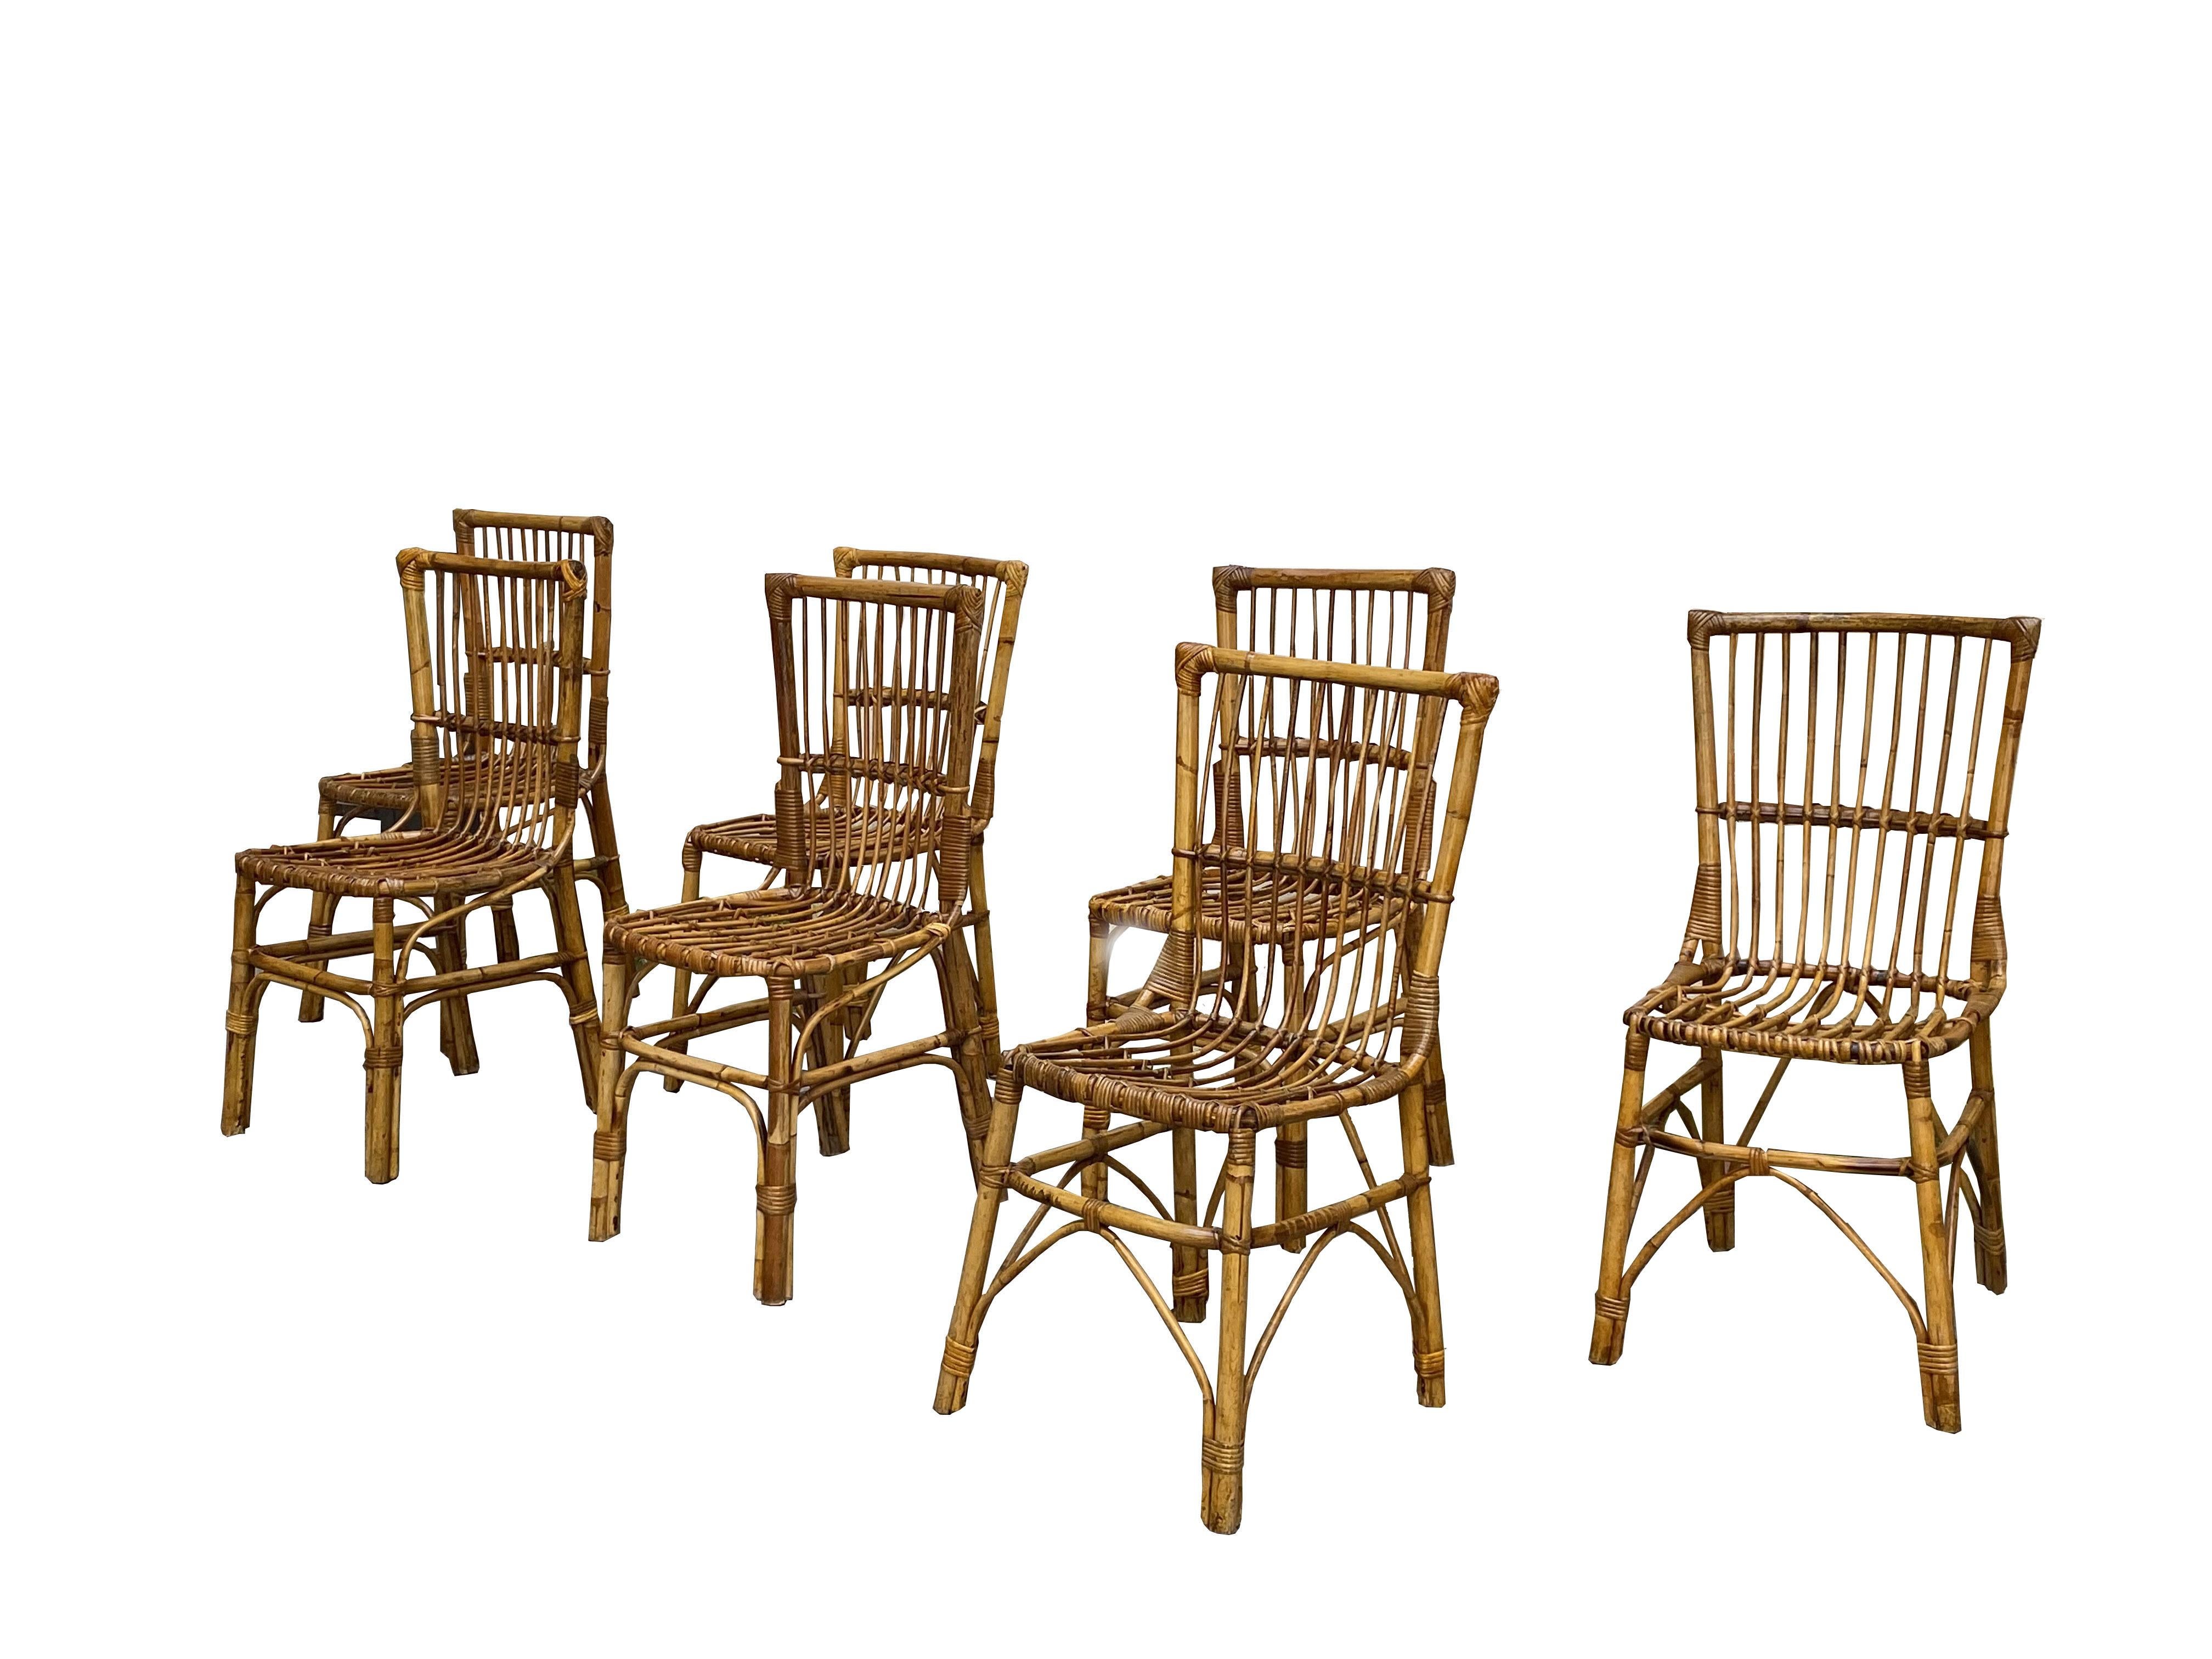 Group of 7 chairs made of rush and wicker, Production Dal Vera 1960.
 In the mood of Arpex International, Mario Lopez Torres, Galerie Maison & Jardin, Jansen, Dal Vera, Vivai Del Sud, Hollywood Regency.